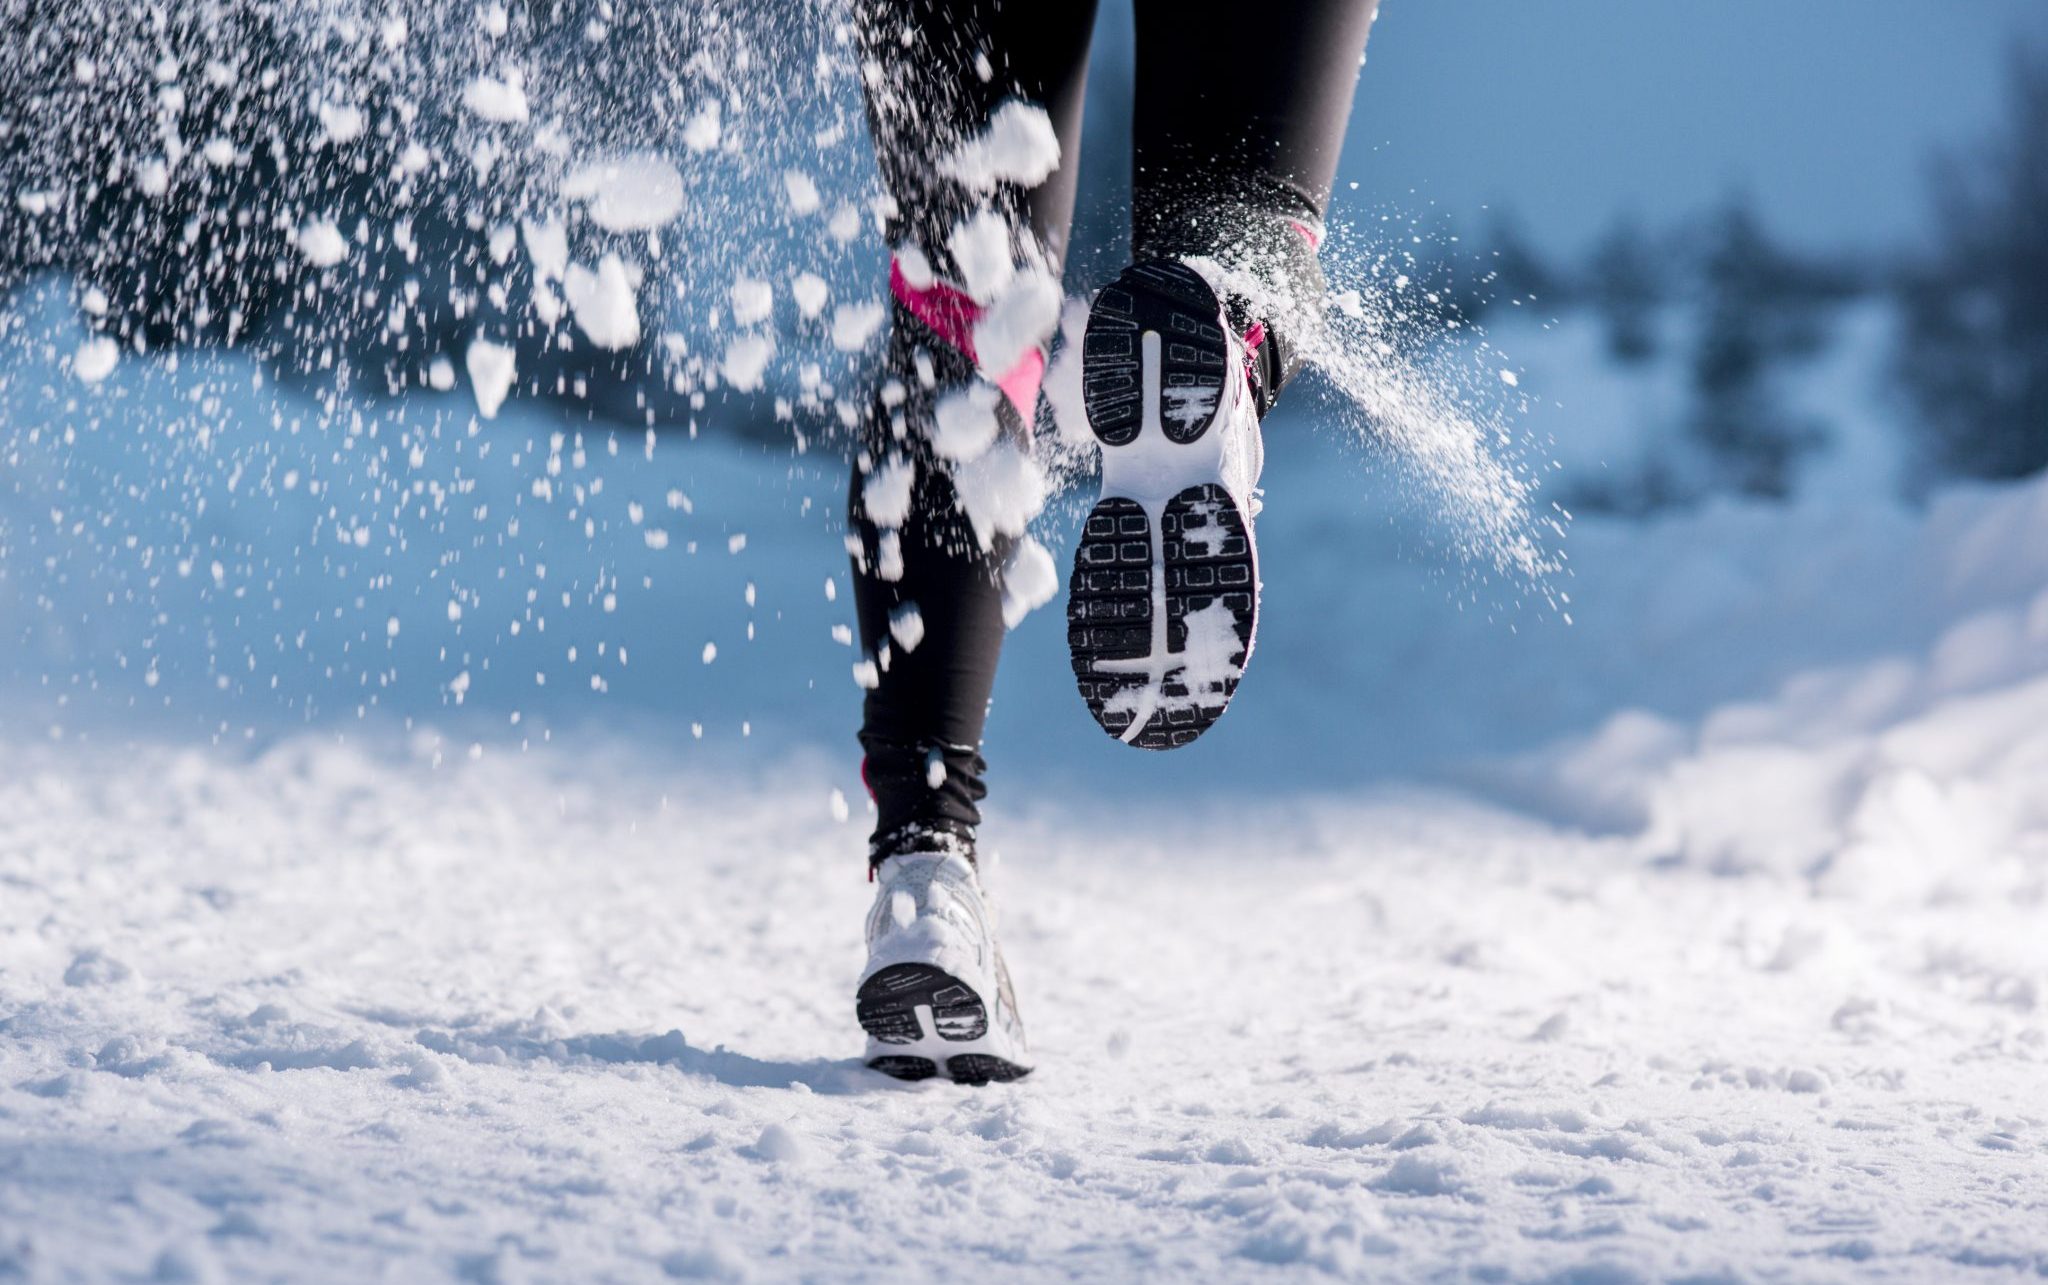 Winter Sports You Need to Try Before The Snow Melts